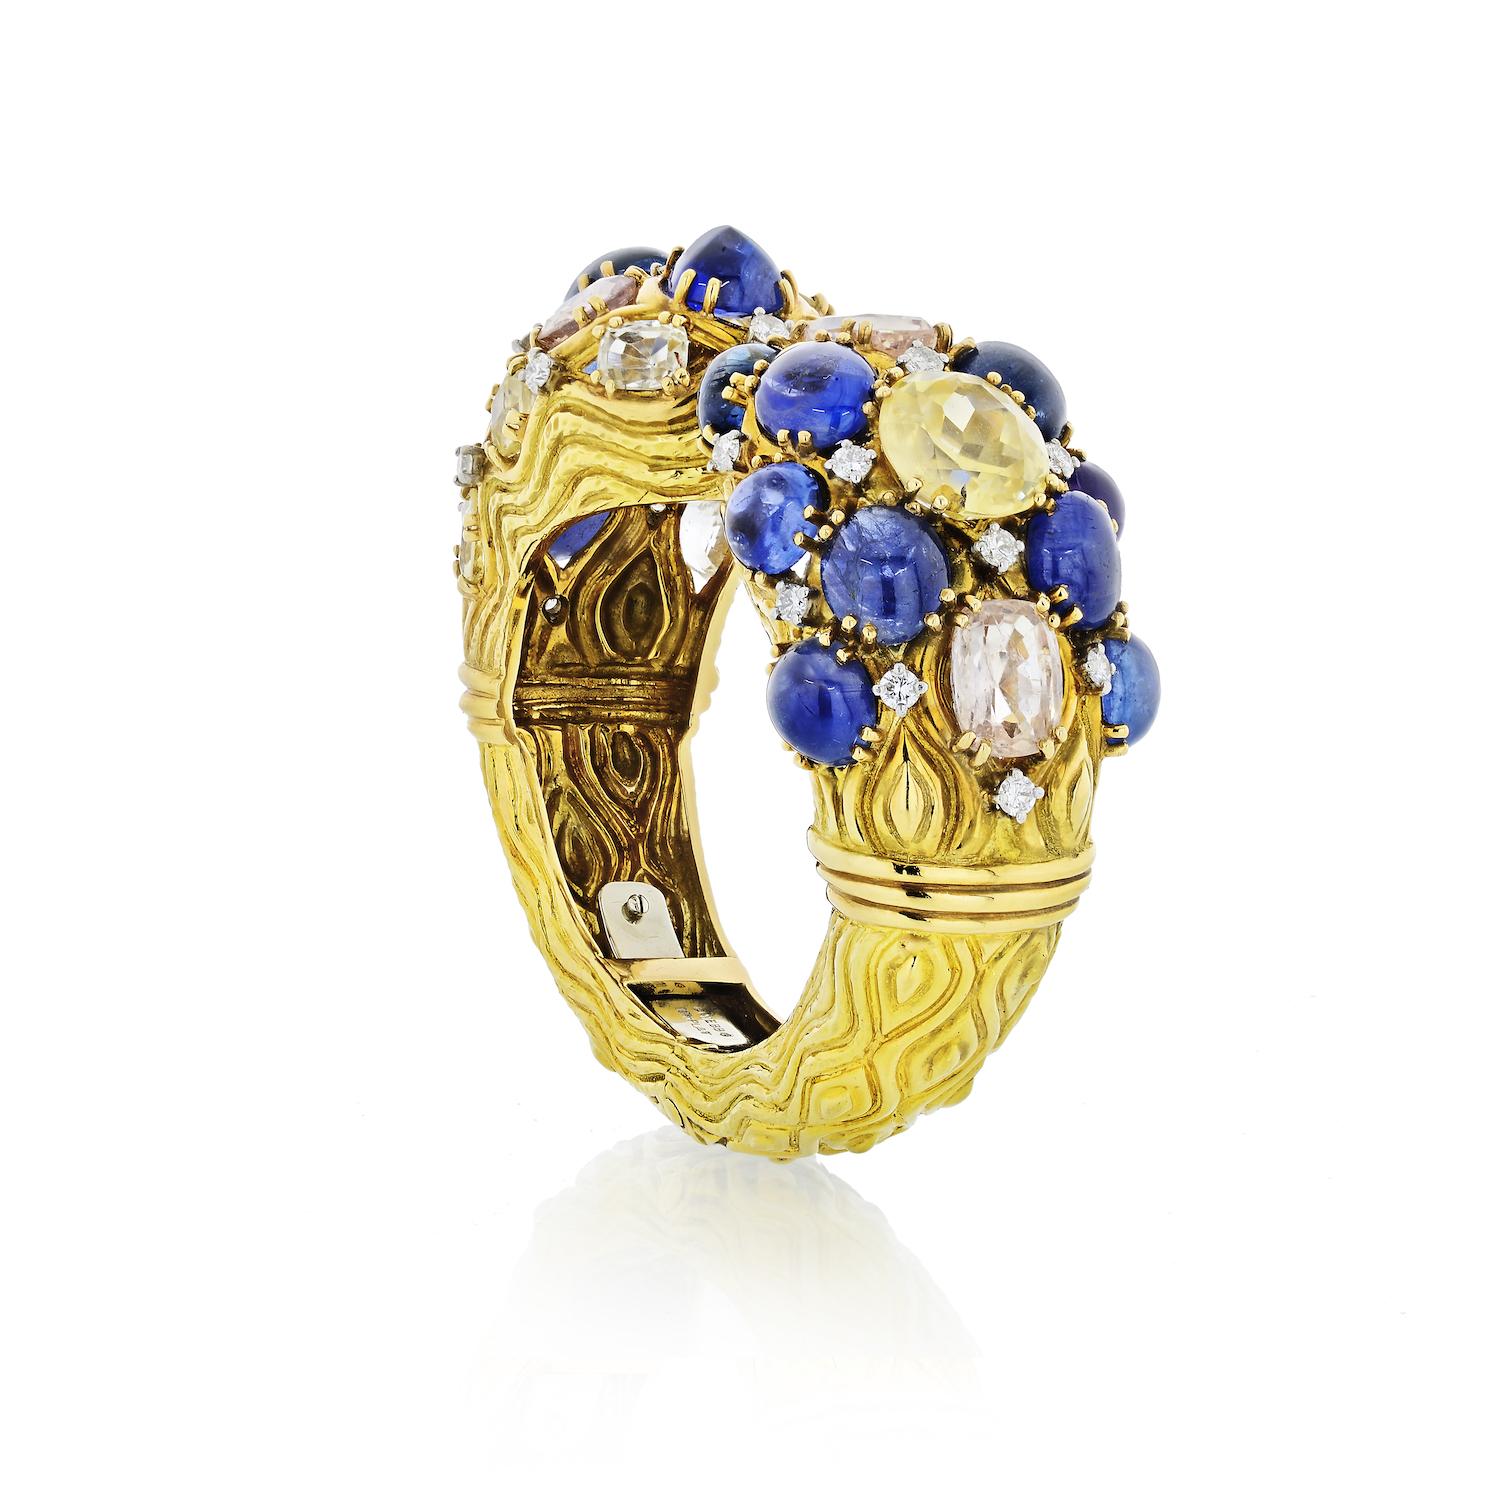 This bold yellow gold cuff bangle by David Webb features natural blue sapphires. Sculpted in 18k yellow gold as a hinged cuff you will be making a bold statement wearing this accessory. 
Set at the top with oval cabochon sapphires and circular-cut